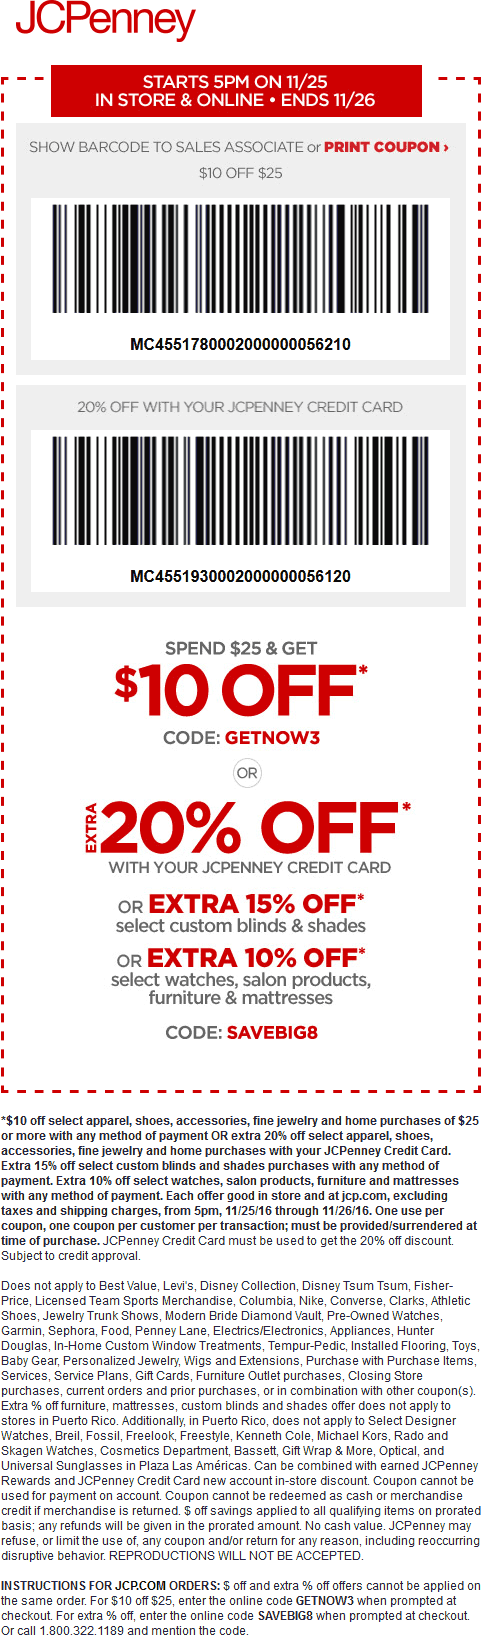 jcpenney-coupons-10-off-25-at-jcpenney-or-online-via-promo-code